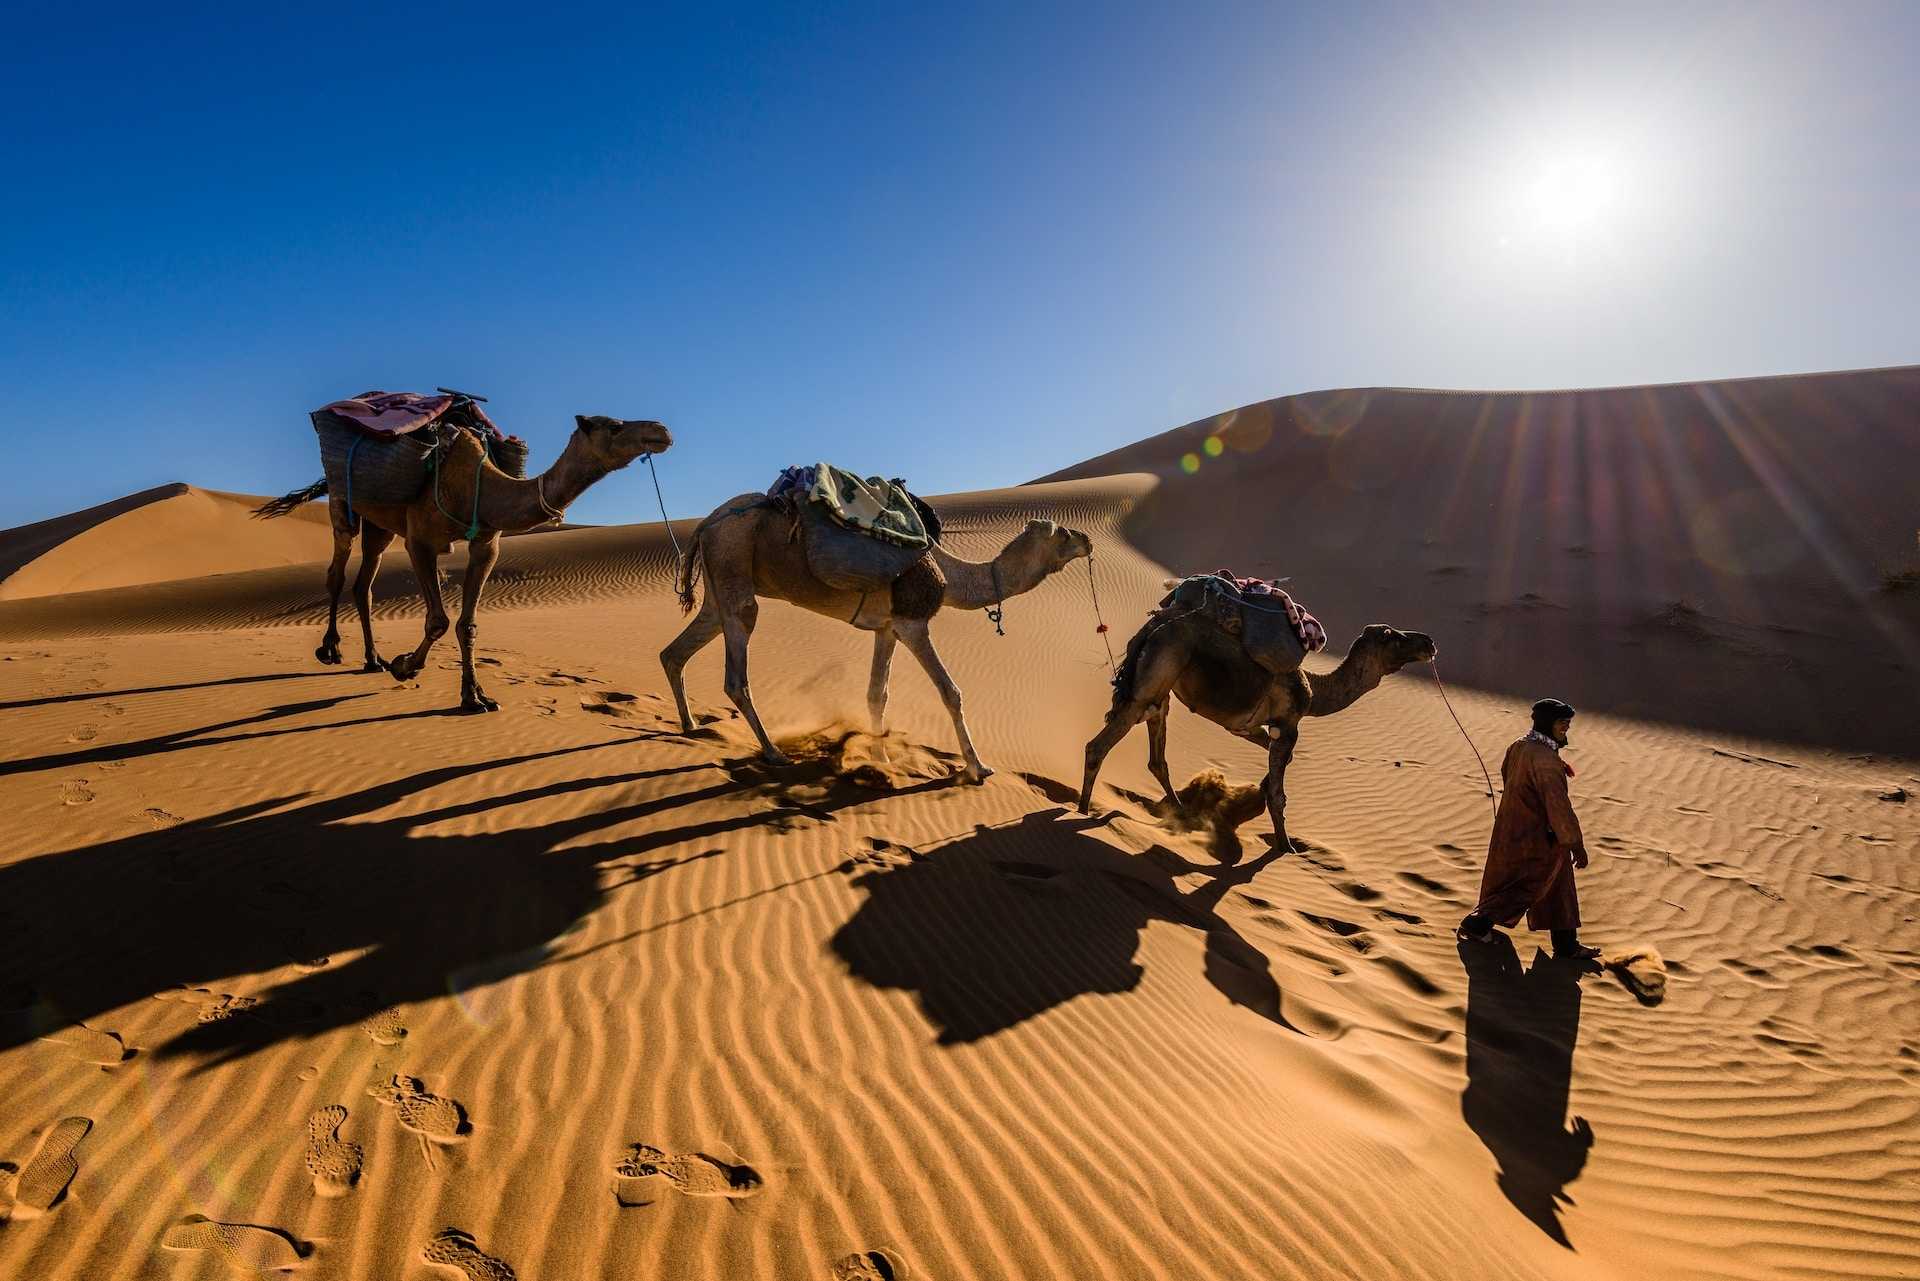 Camels carrying cargo in the Sahara